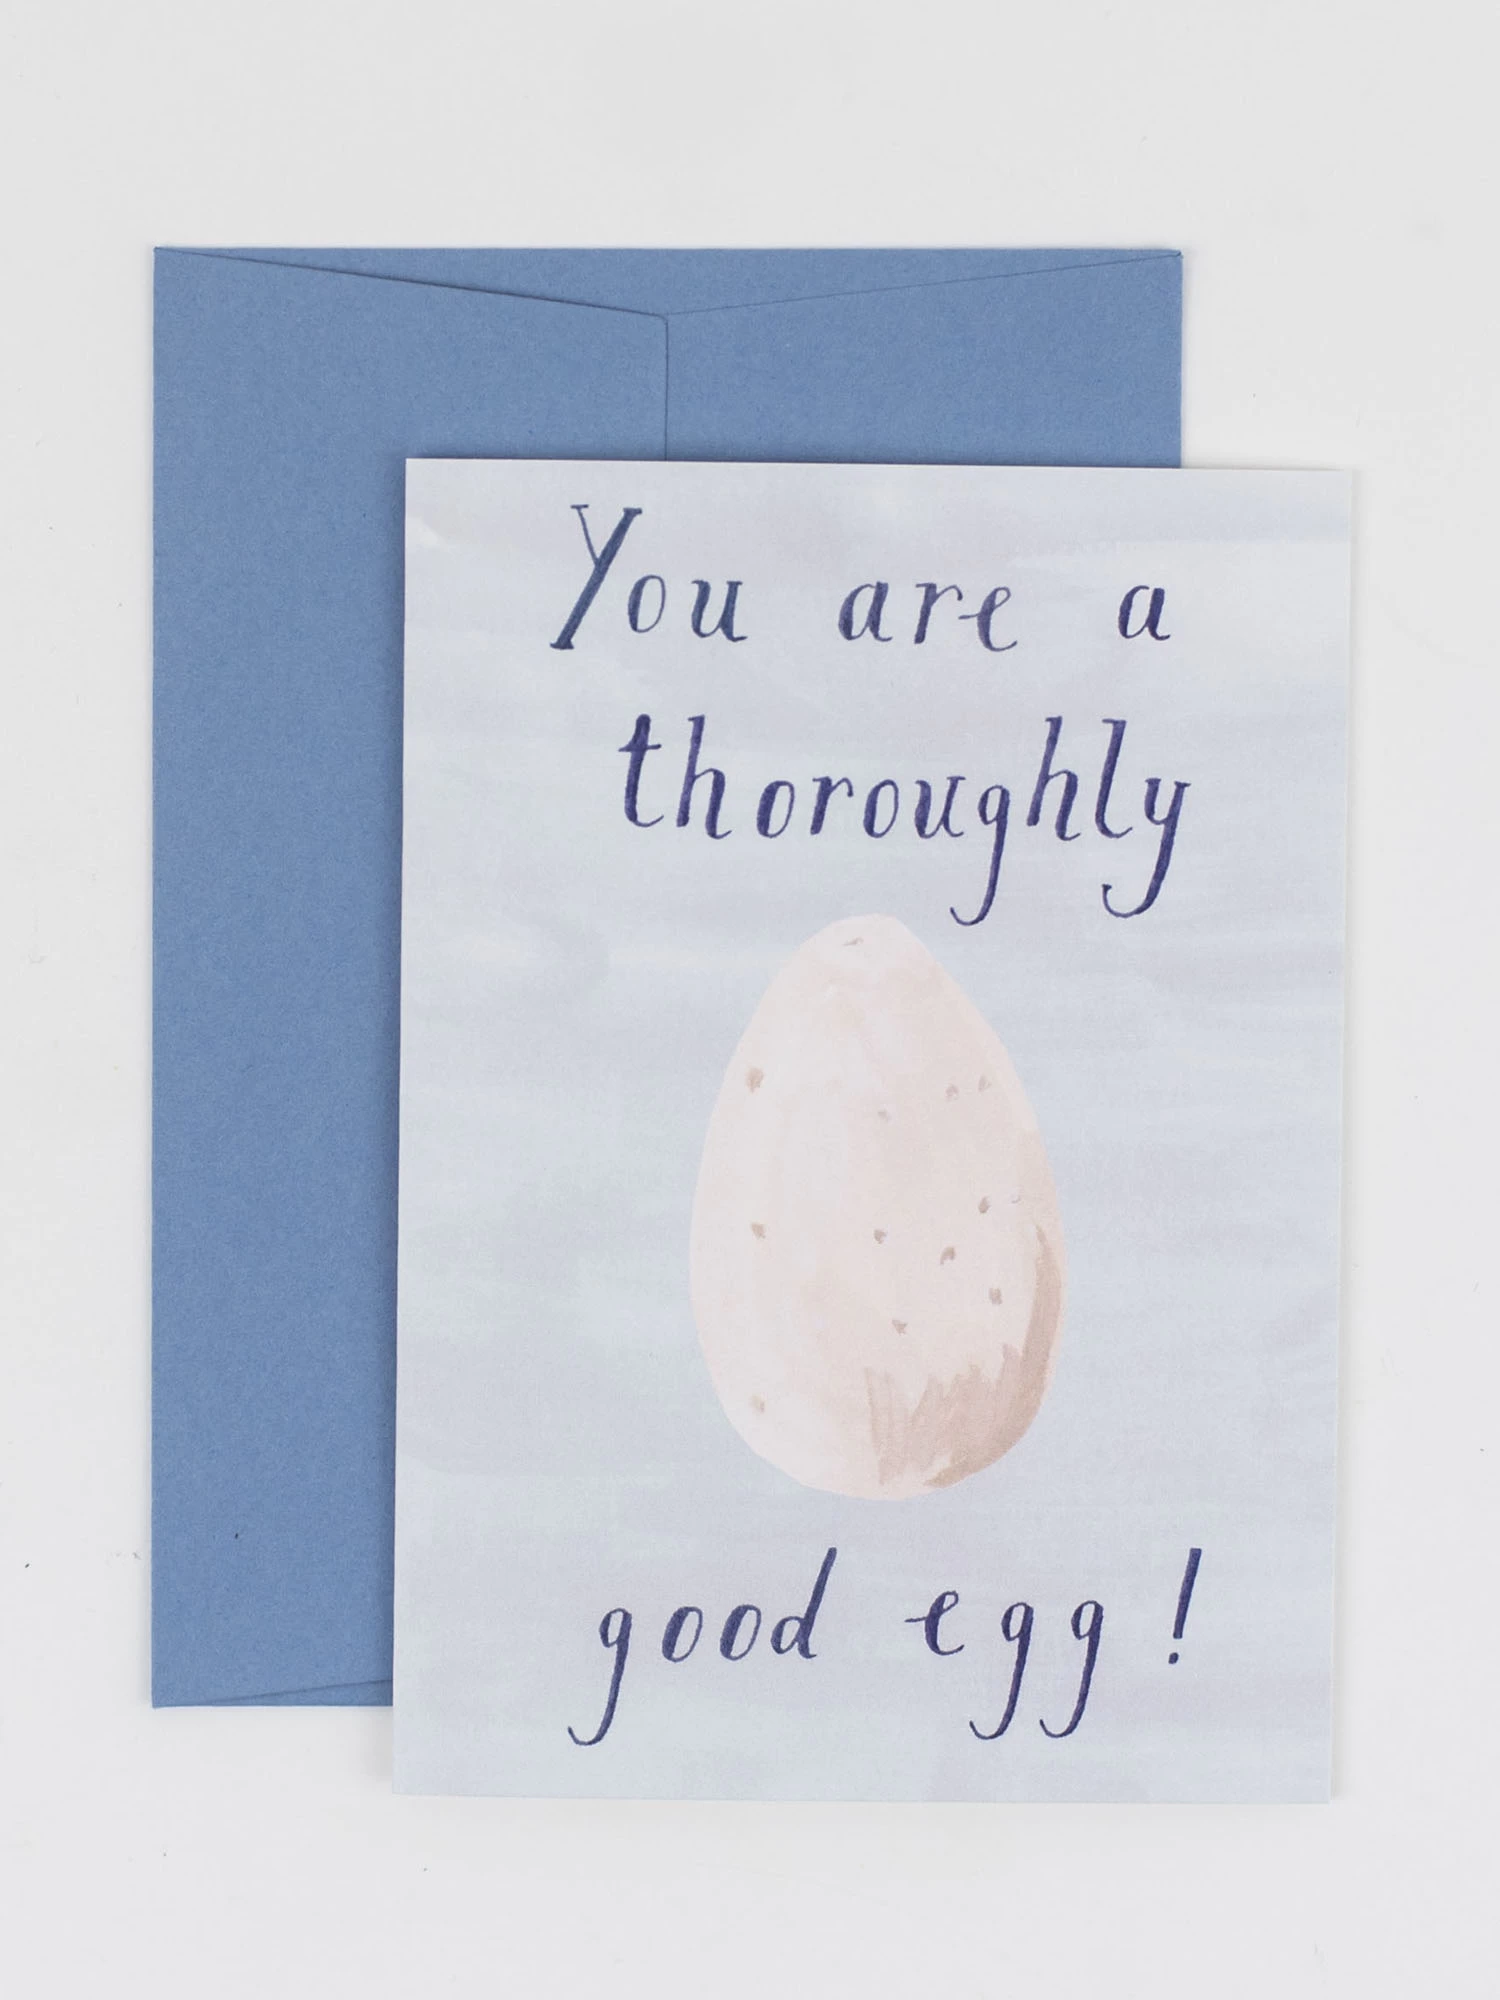 A card featuring an illustration of an egg and the words "you are a throughly good egg". Photographed with a pale blue envelope